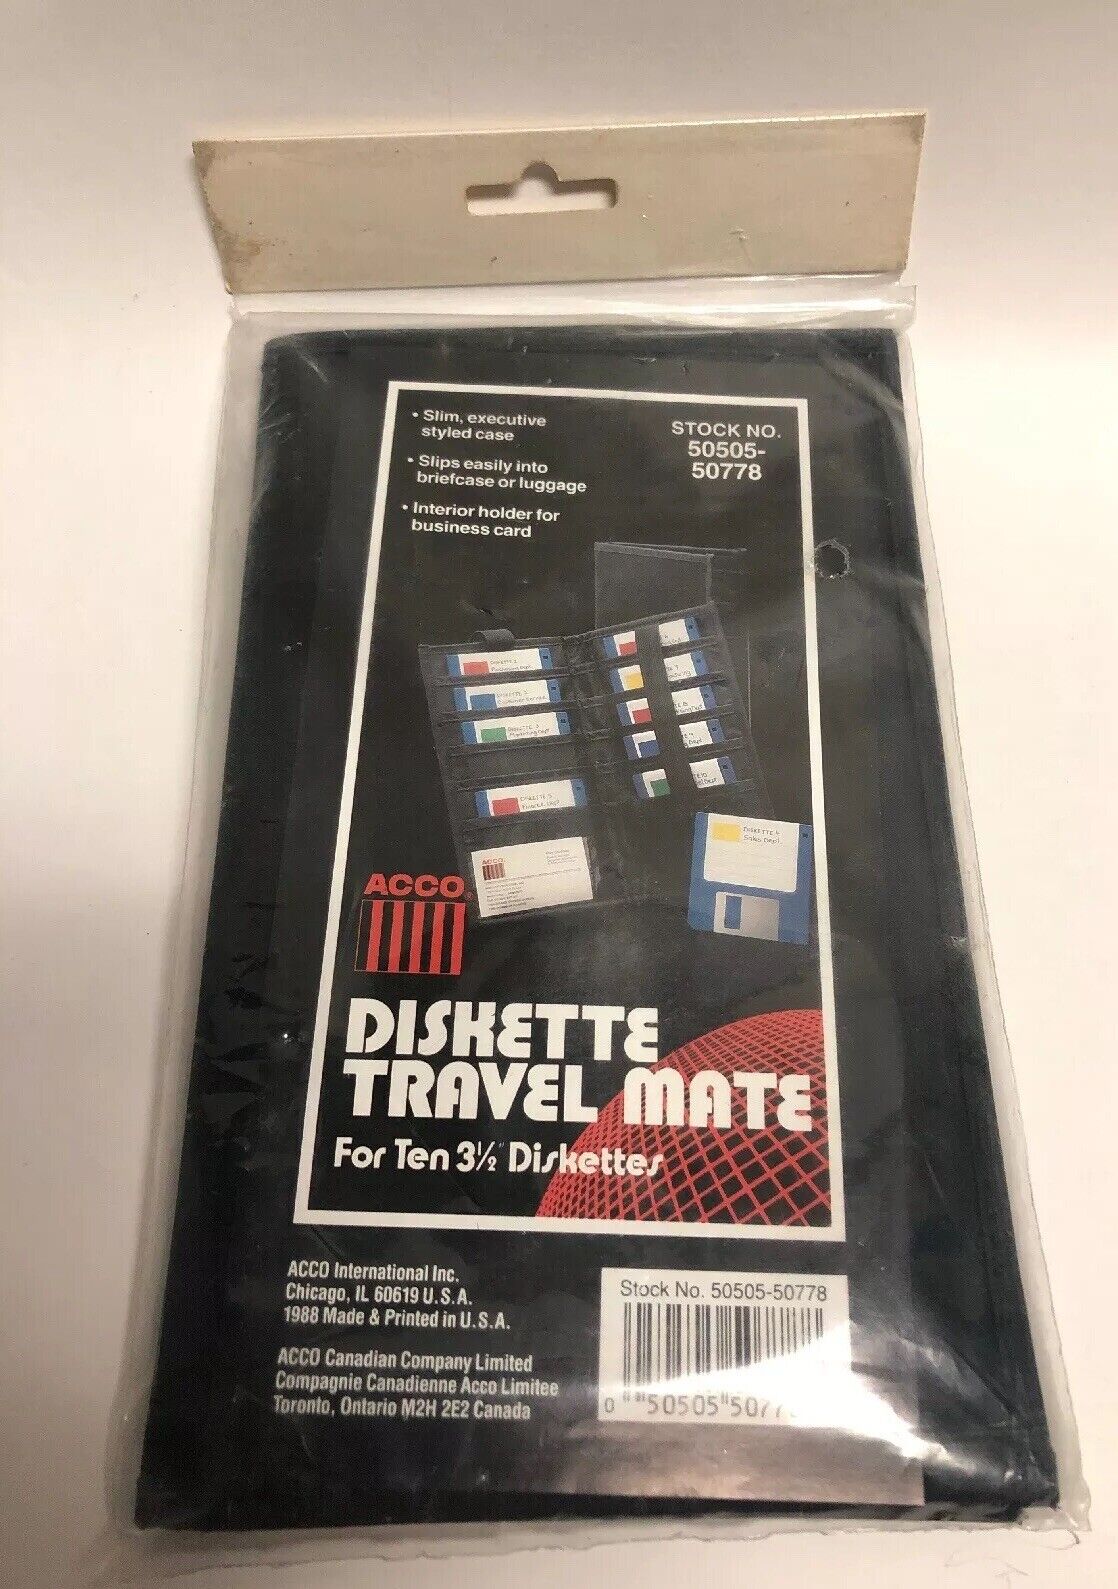 Vintage ACCO 3.5” Diskette Travel Mate Case Holds 10 Diskettes - Circa 1988